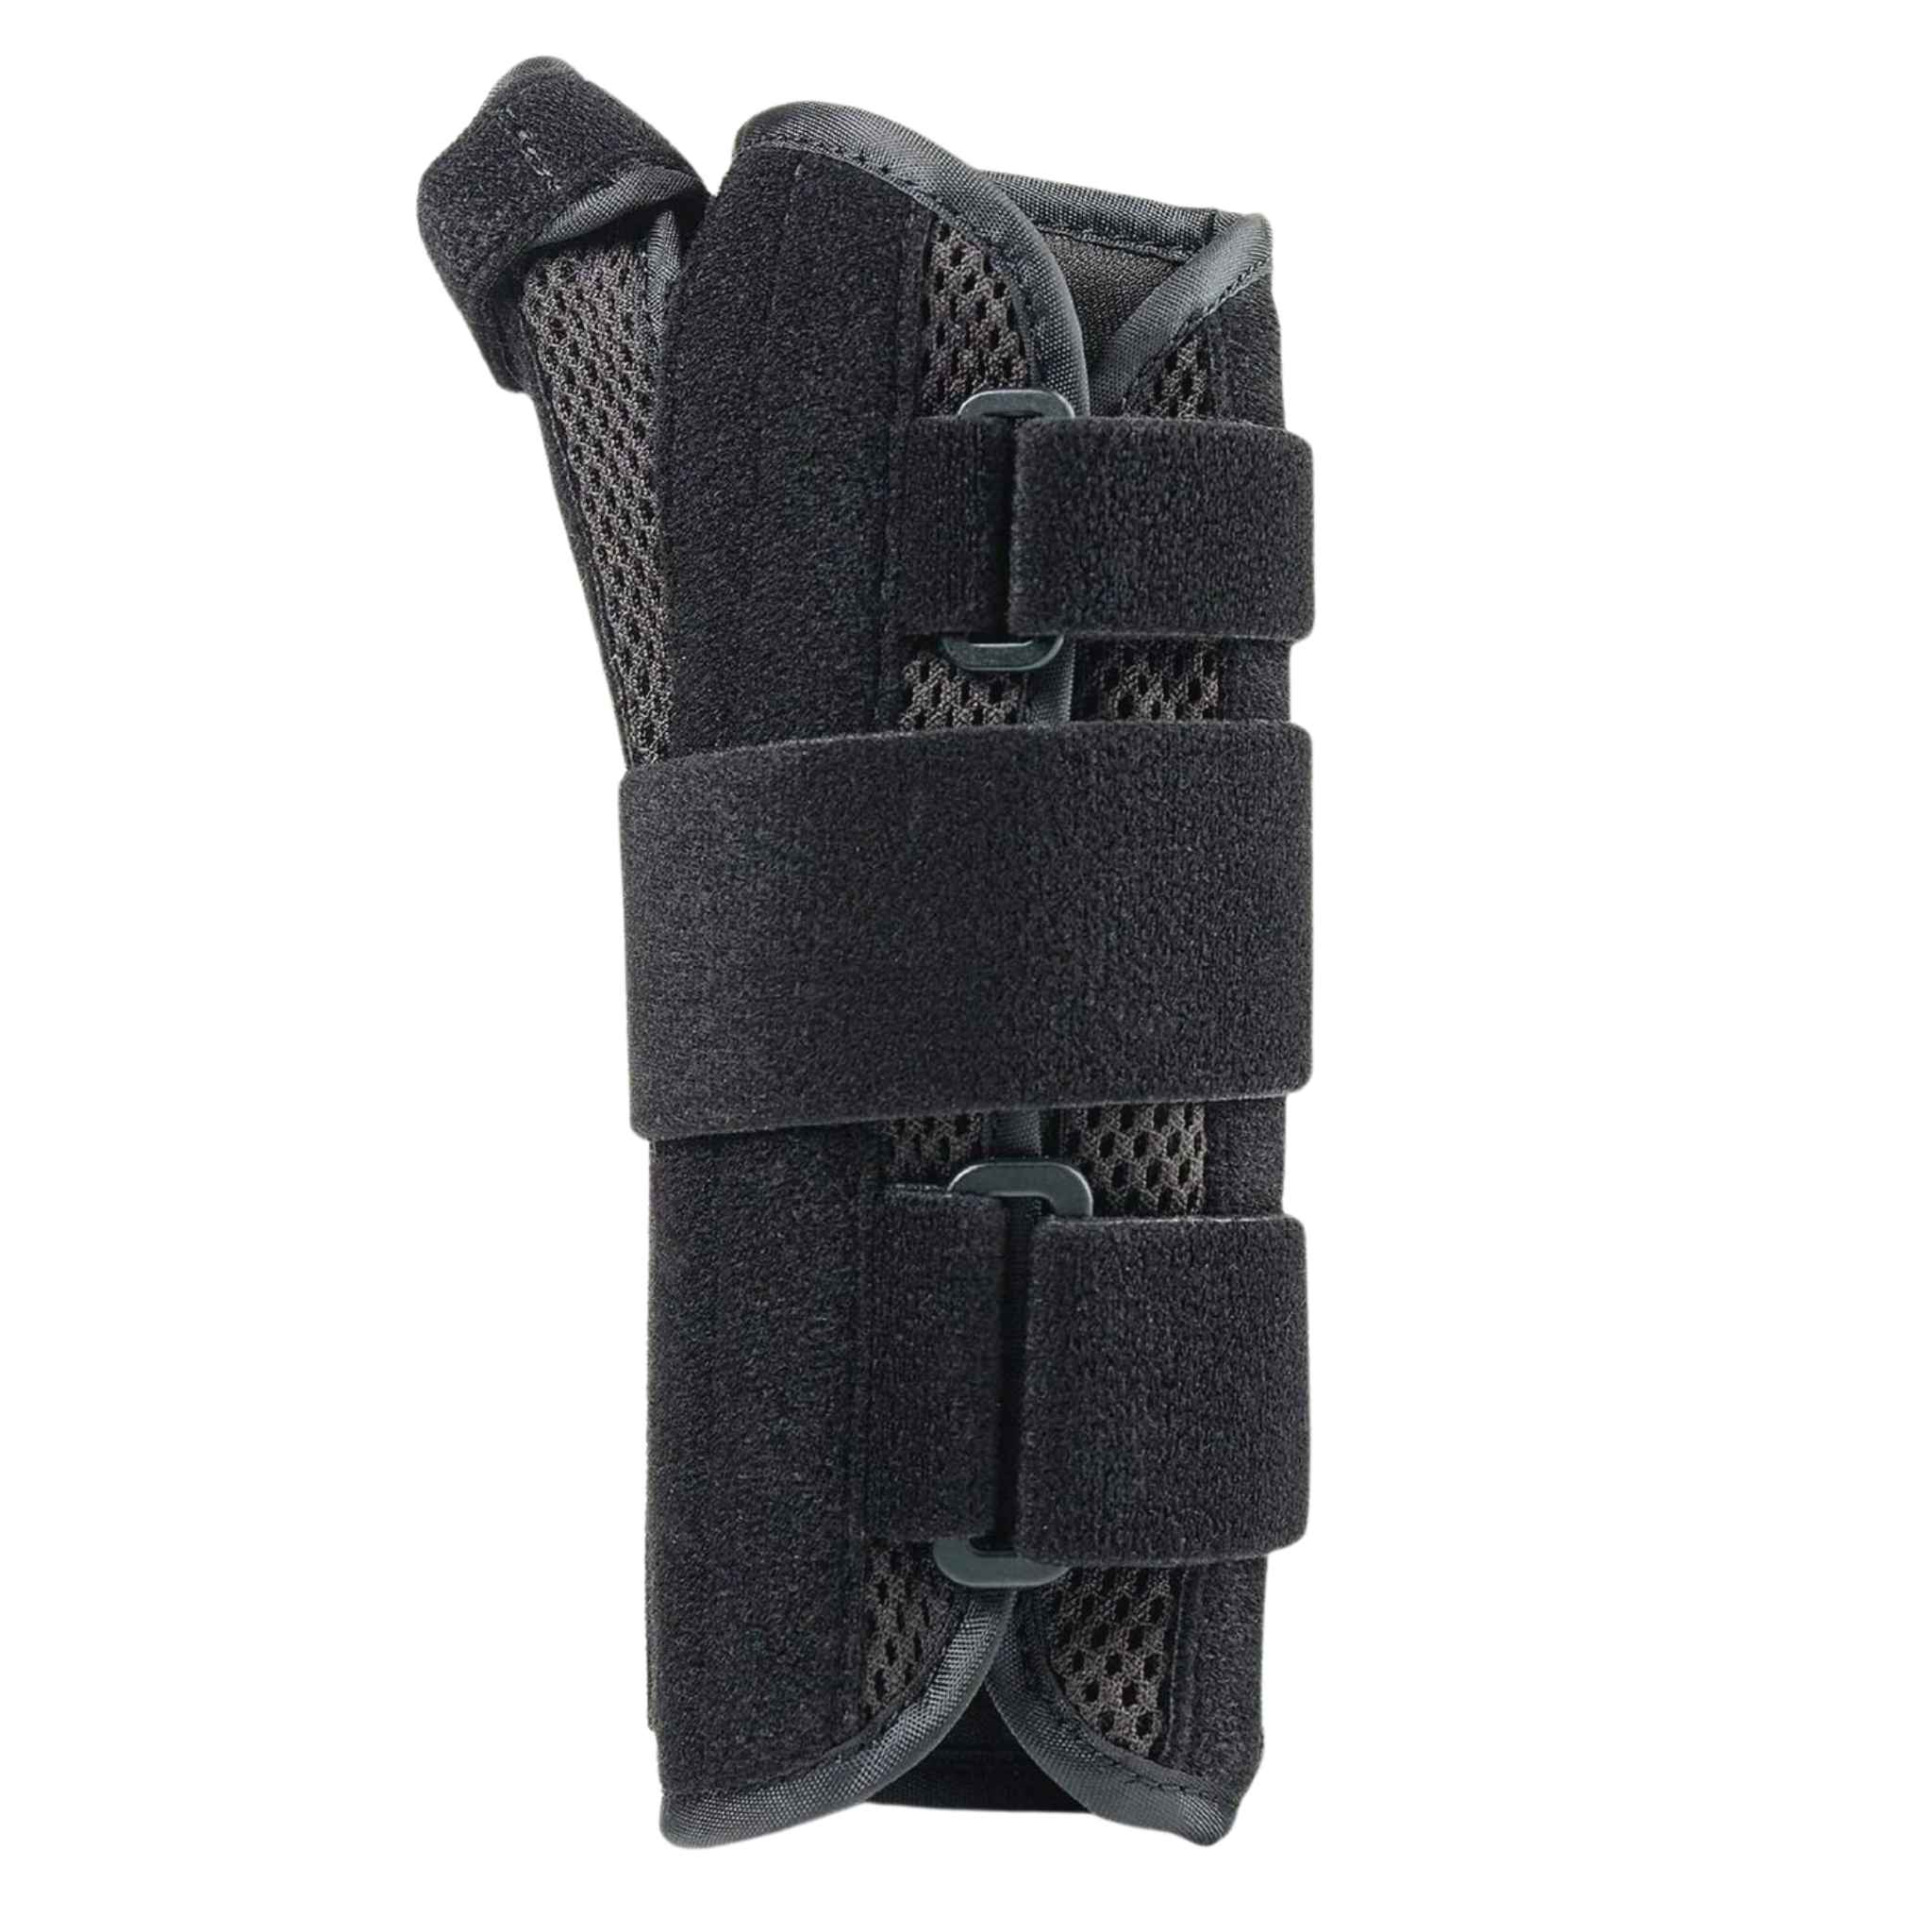 Wrist Brace with Thumb Support